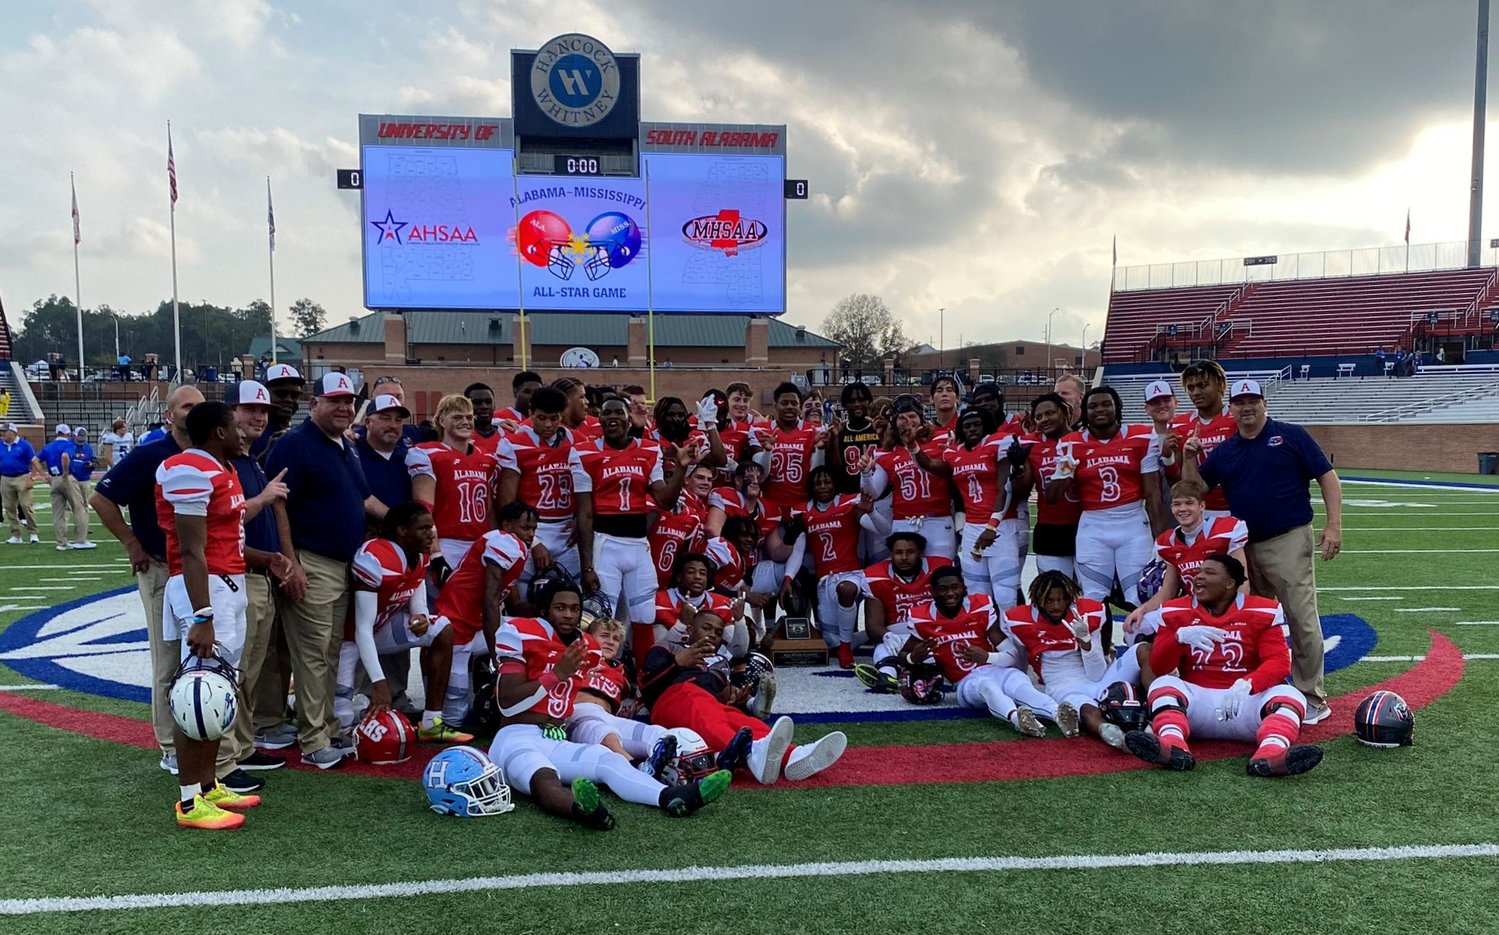 Team Alabama celebrates on the field of Hancock Whitney Stadium at the University of South Alabama Saturday afternoon, Dec. 10, after winning the 36th annual Alabama-Mississippi All-Star Classic 14-10. Foley’s Harrison Knight, third row far left, finished with 1 catch as Baldwin County’s lone representative.